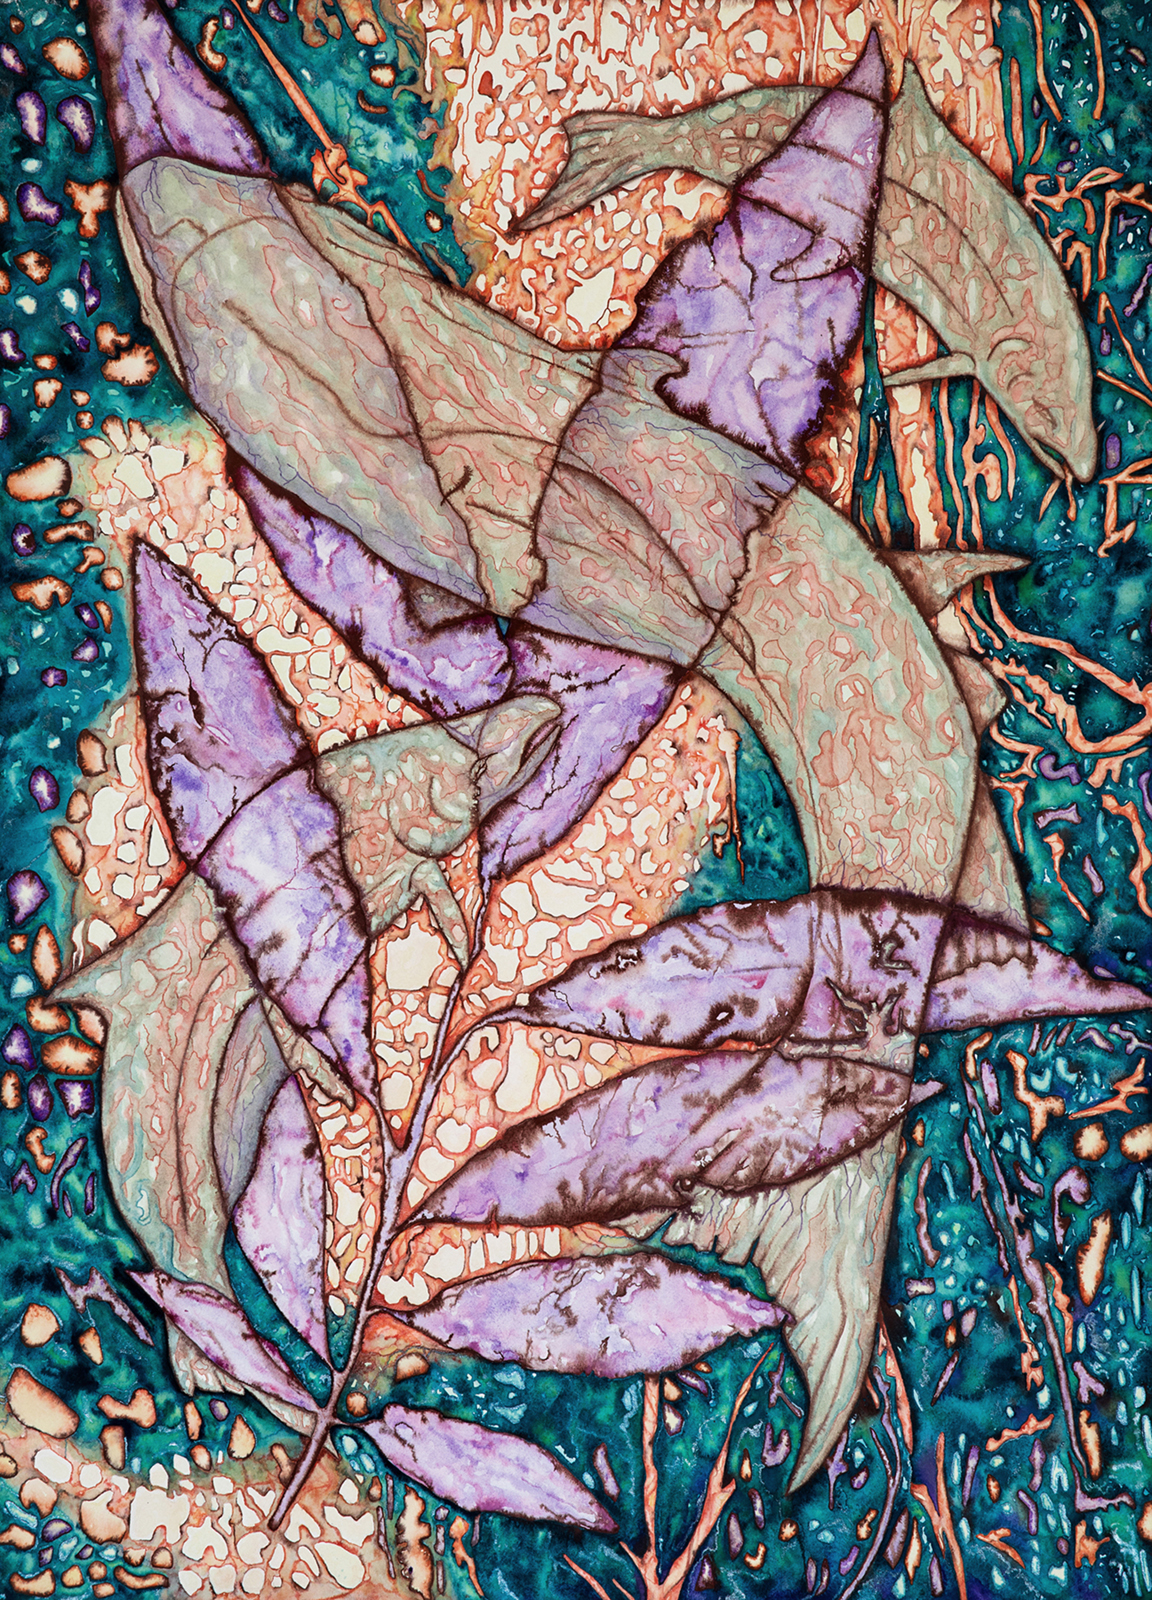 brightly colored painting showing the purple impression of a leaf. Image courtesy of Susan Andrews